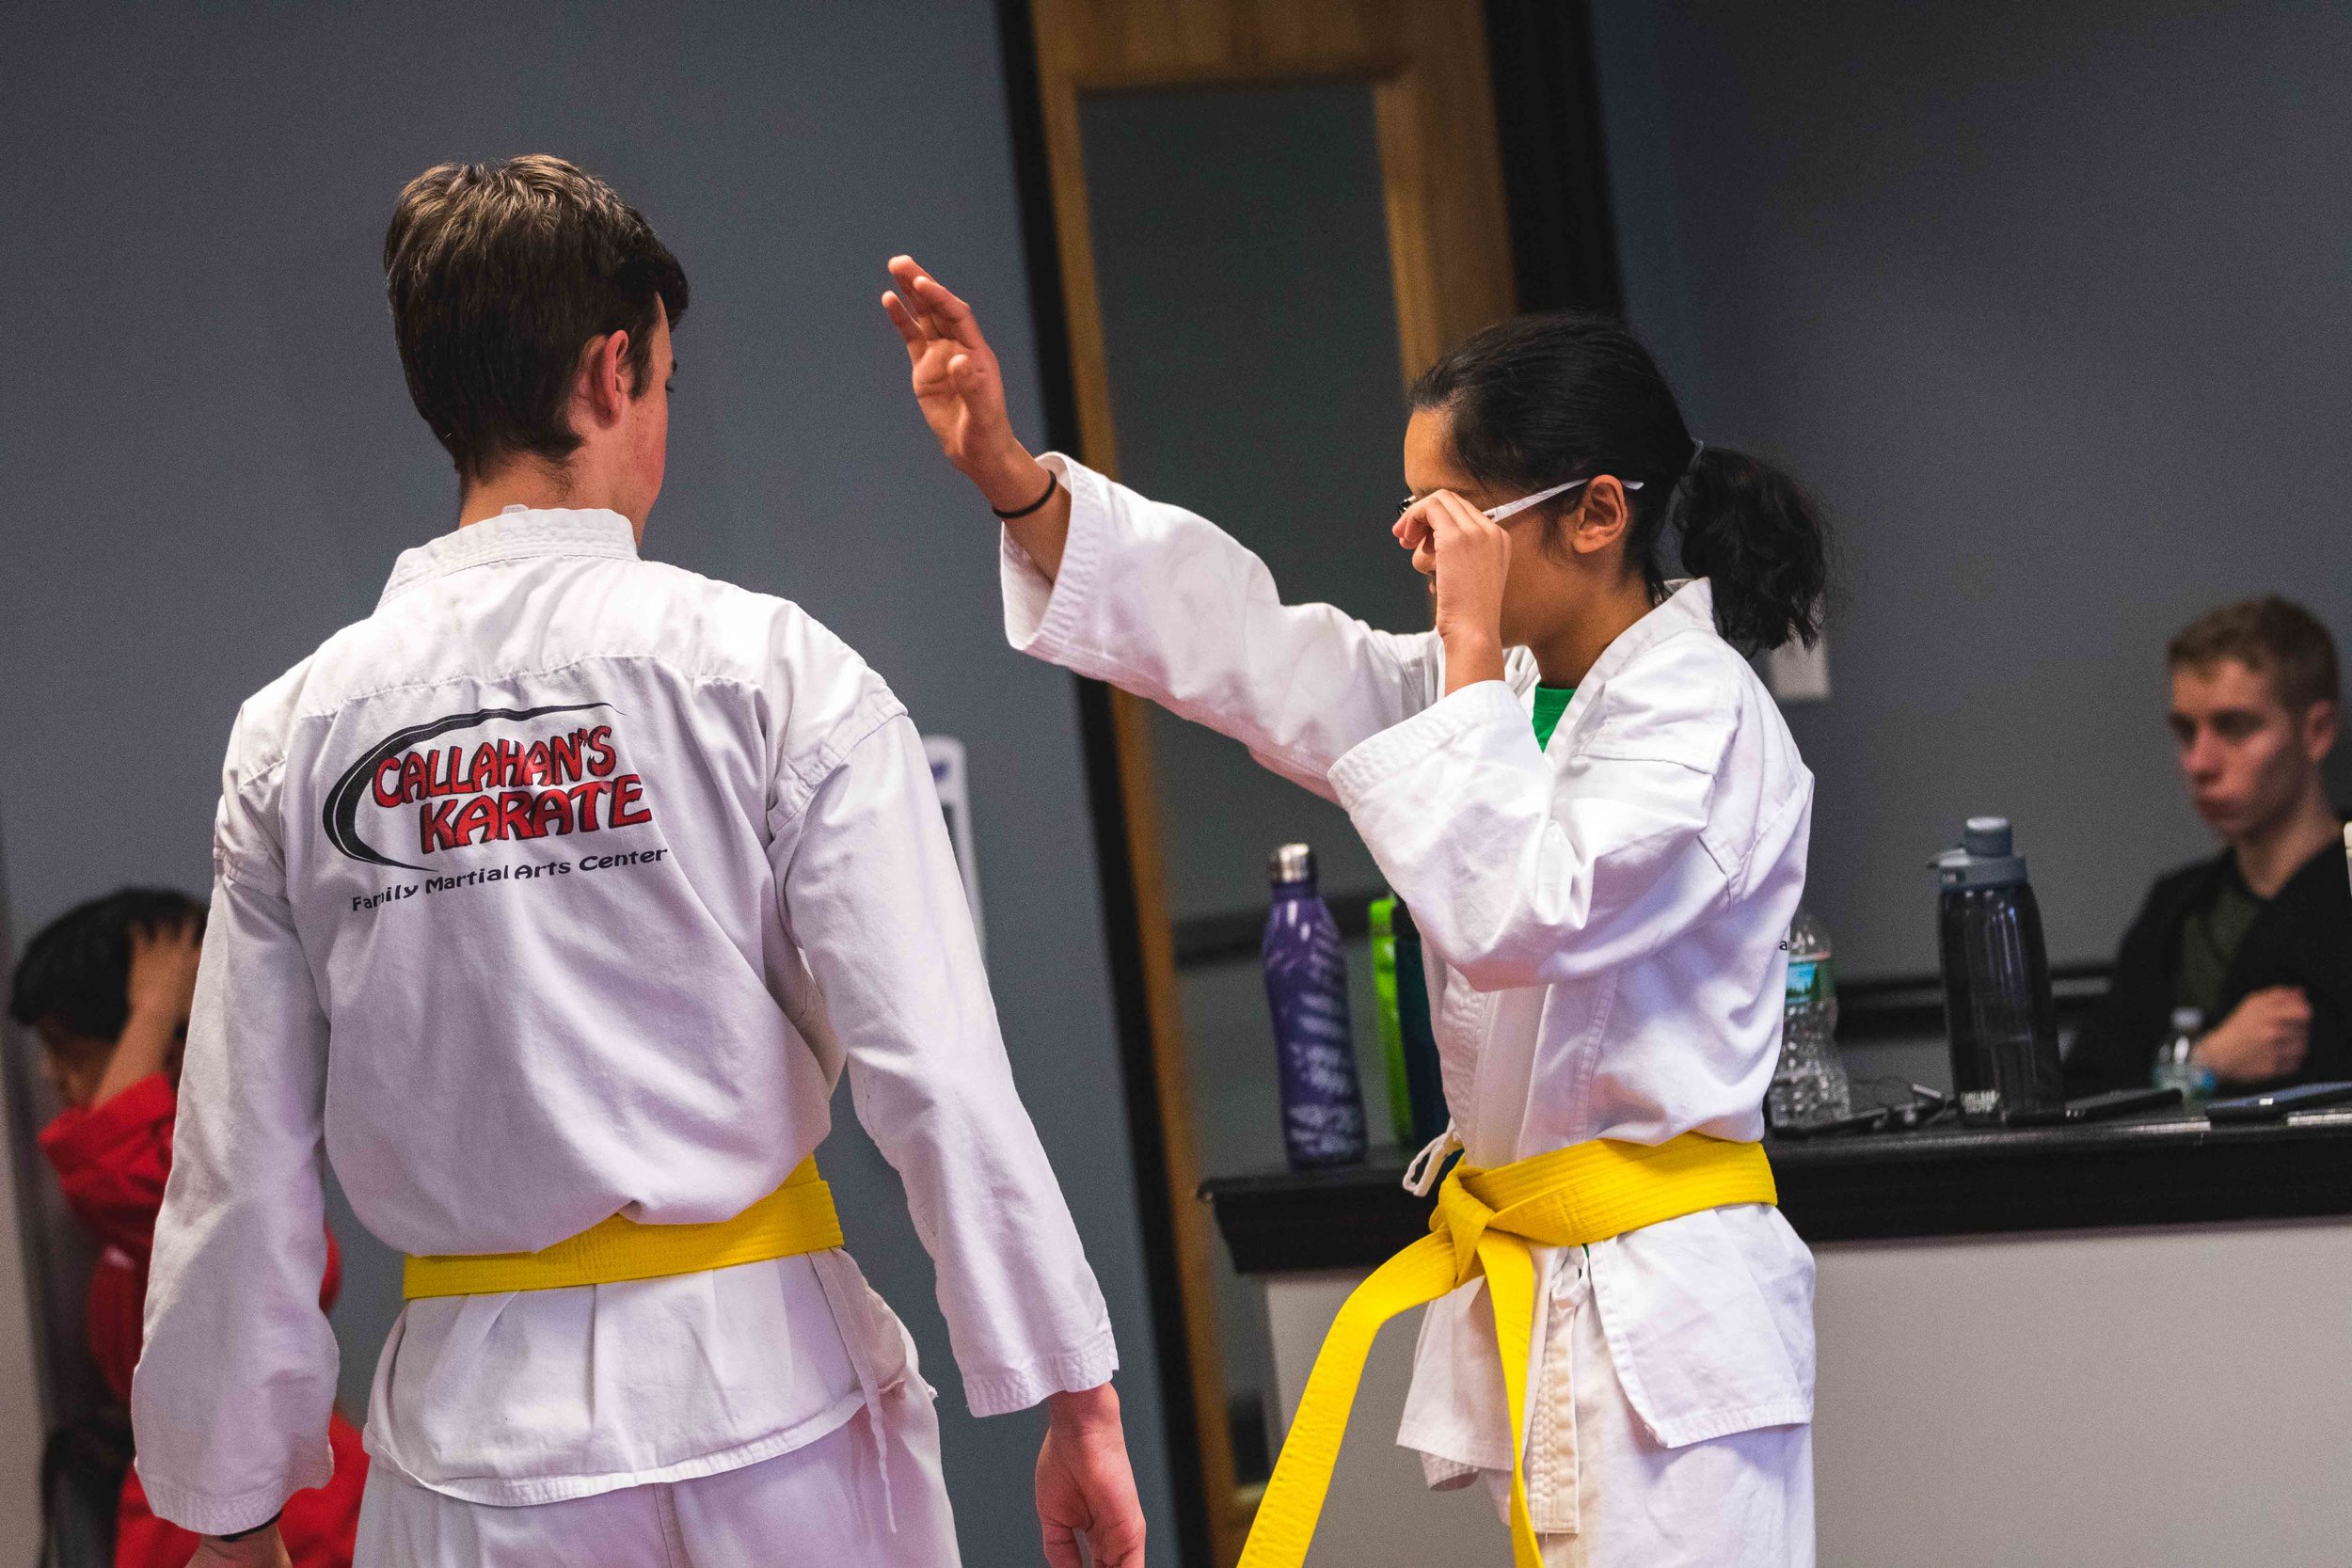 Martial Arts Classes for Teenage Girls and Boys in Bedford Massachusetts at Callahan's Karate.jpg